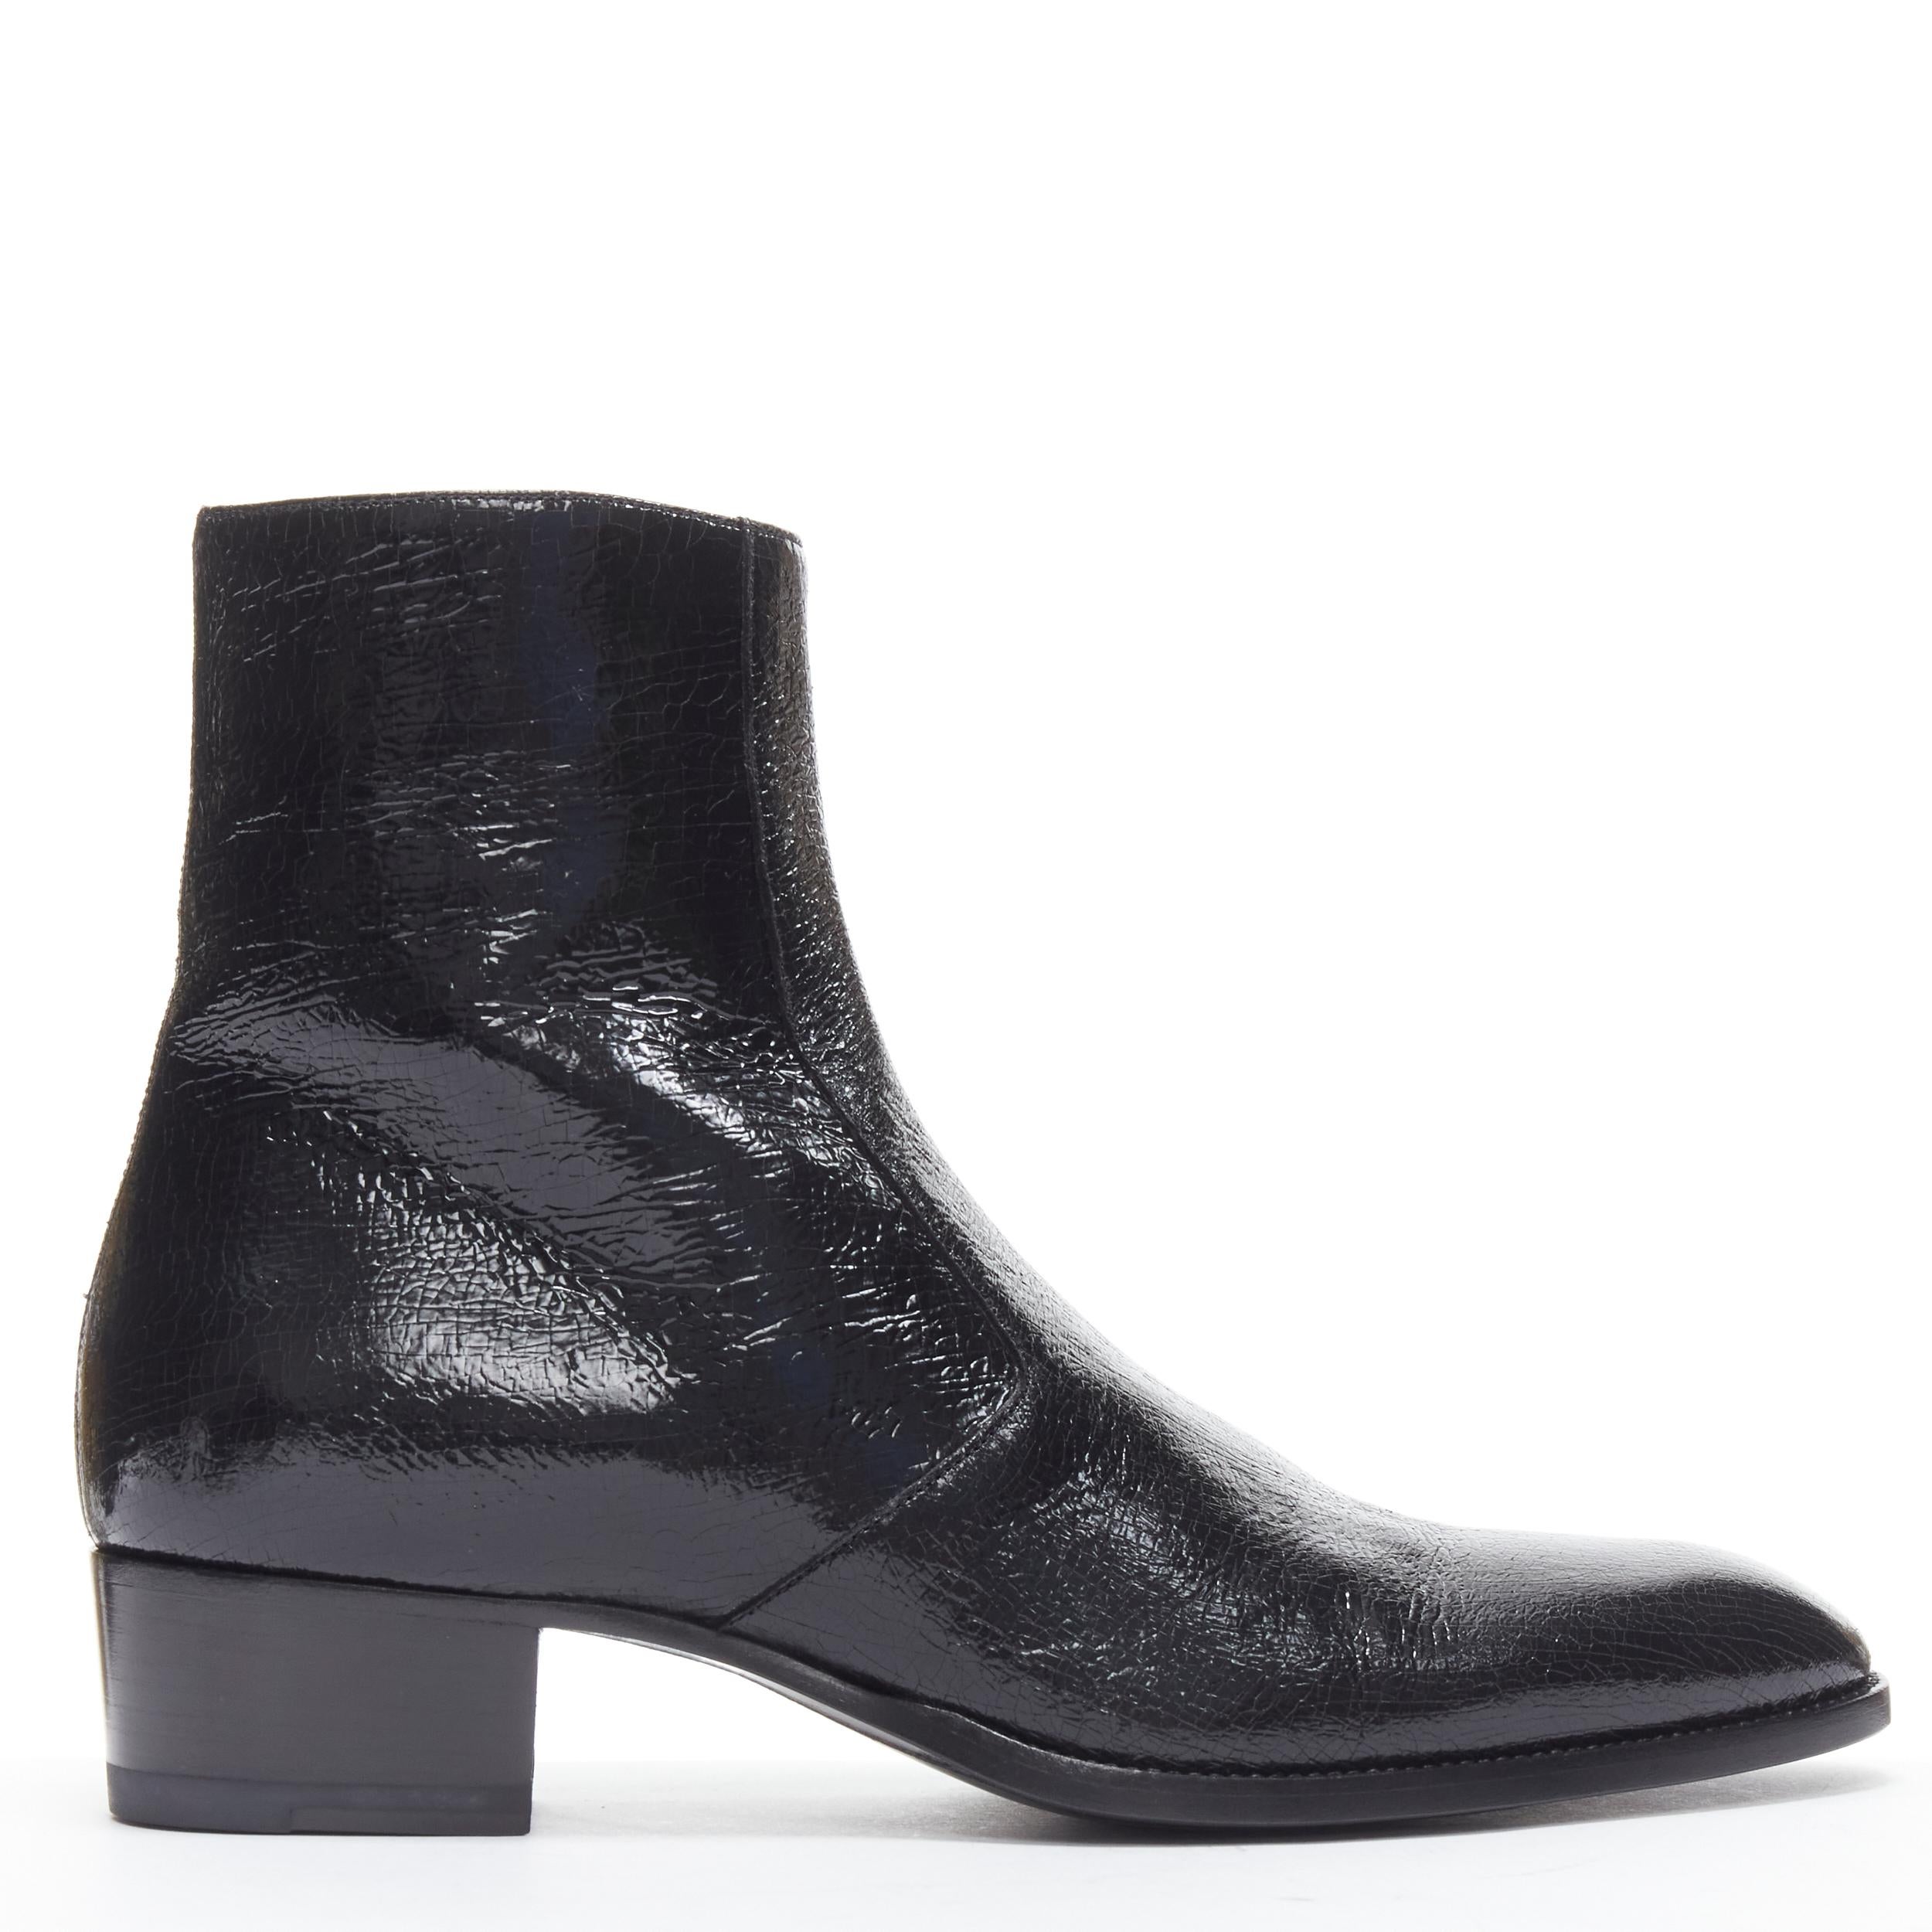 new SAINT LAURENT Wyatt 40 Zip Metal Crack Heavy black Chelsea boot EU44 
Reference: TGAS/B01698 
Brand: Saint Laurent 
Material: Leather 
Color: Black 
Pattern: Solid 
Closure: Zip 
Made in: Italy 

CONDITION: 
Condition: New with tags. 
Comes